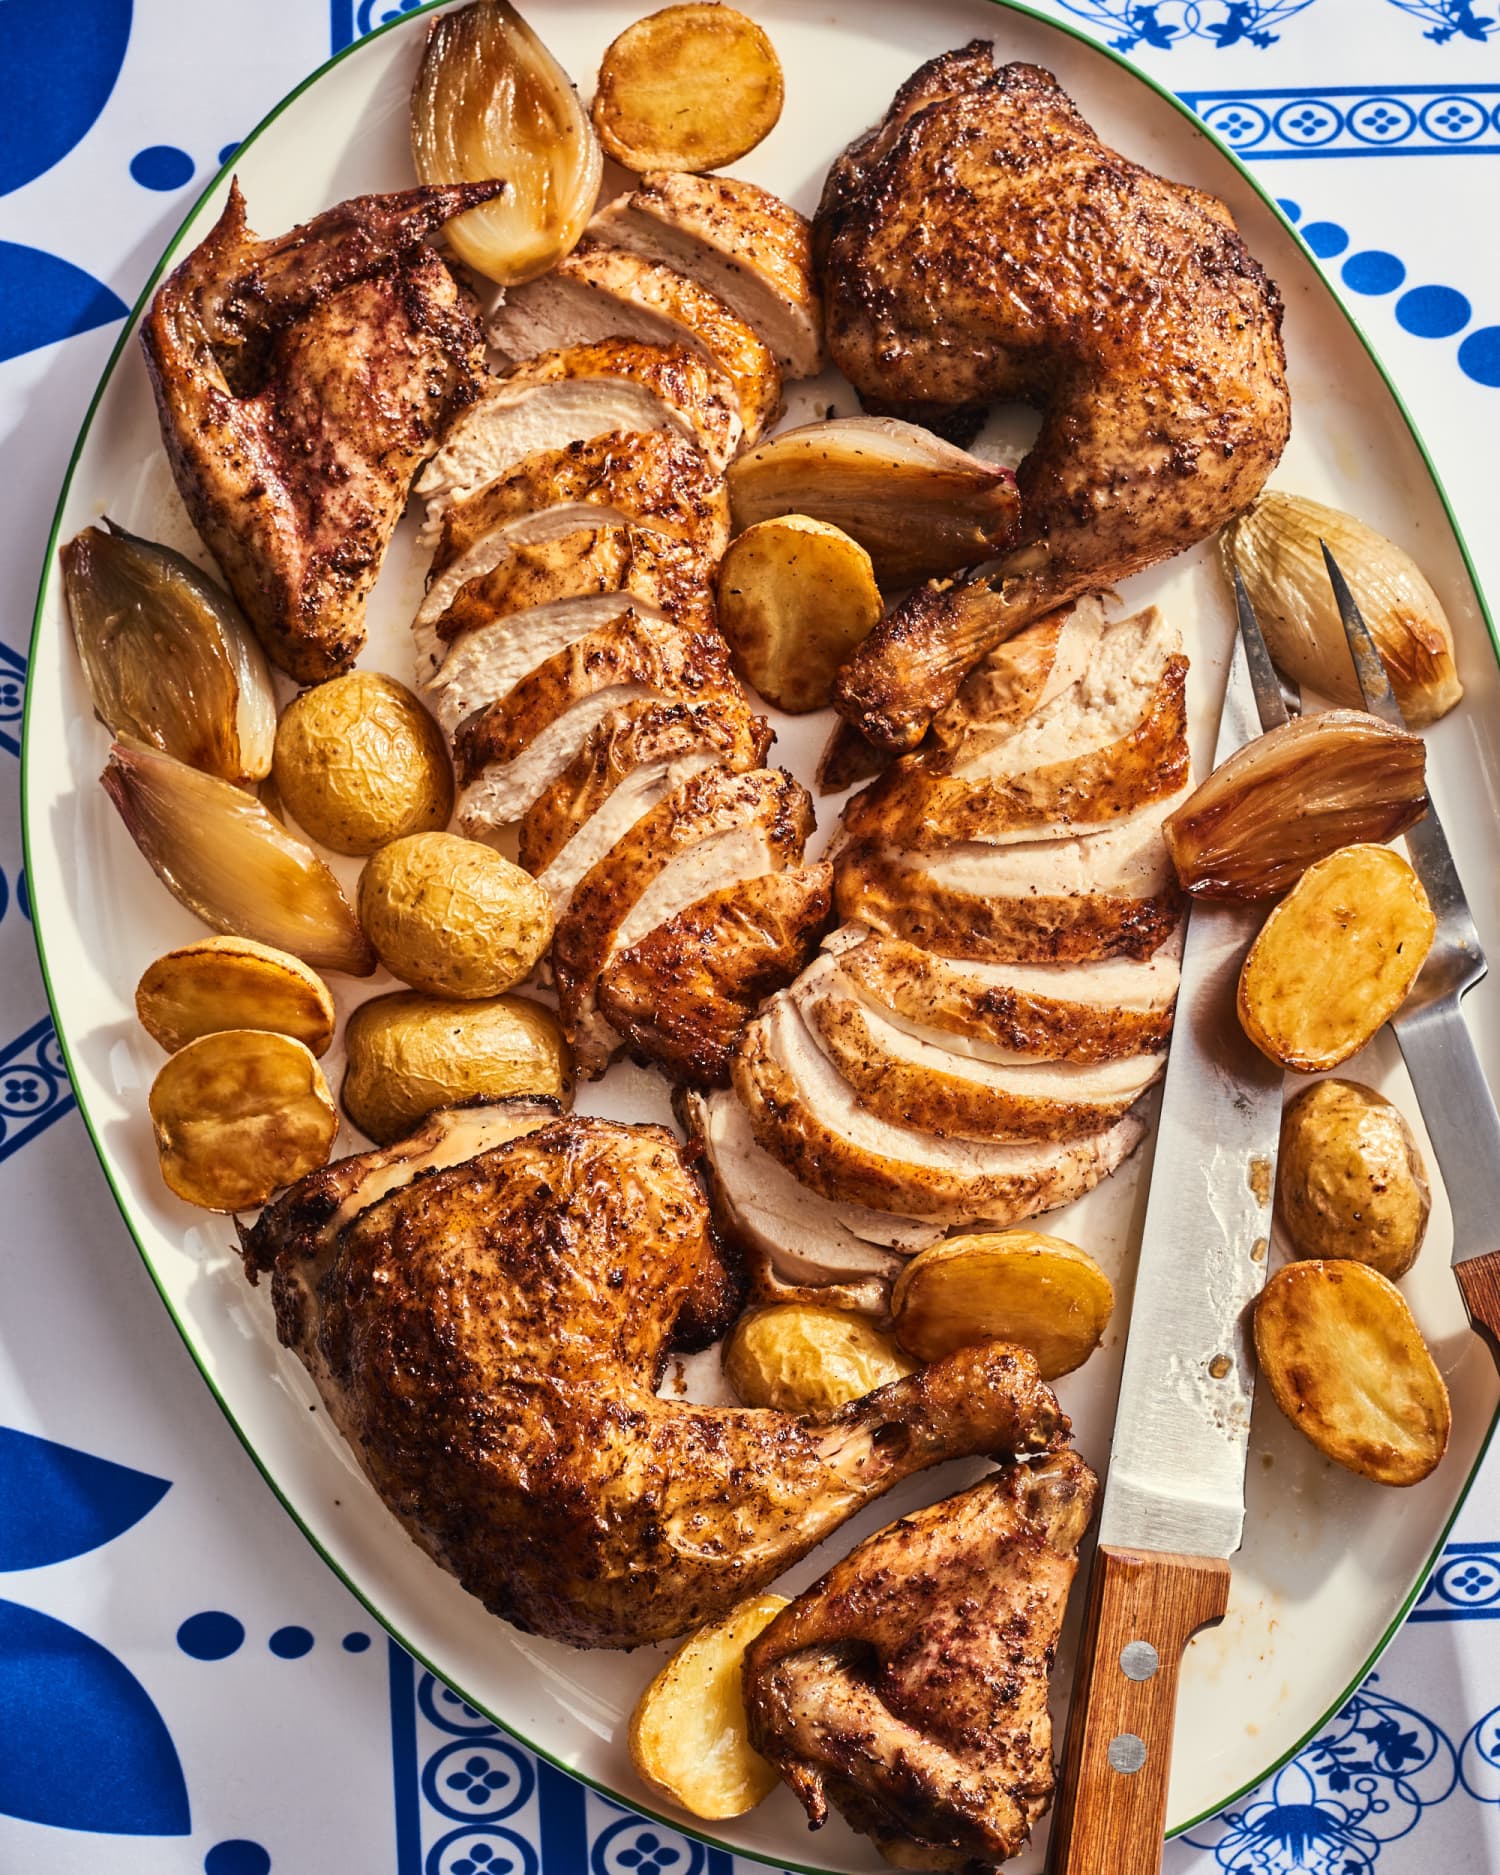 The Star of This Lemon-Sumac Roasted Chicken Is the Super-Crispy Skin